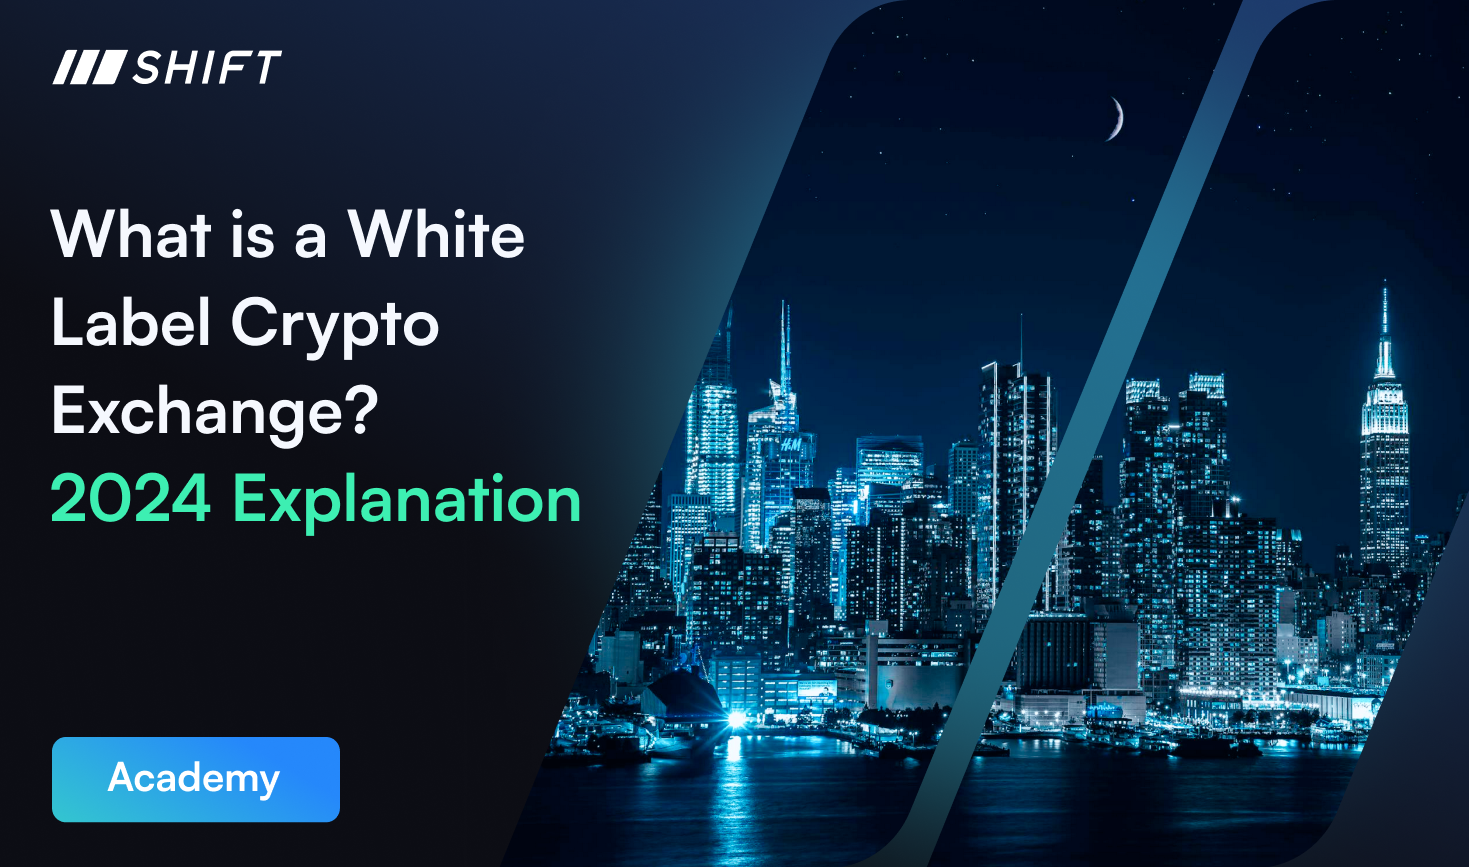 White Label crypto exchange platforms allow for fast and aggressive entry into the crypto exchange market.